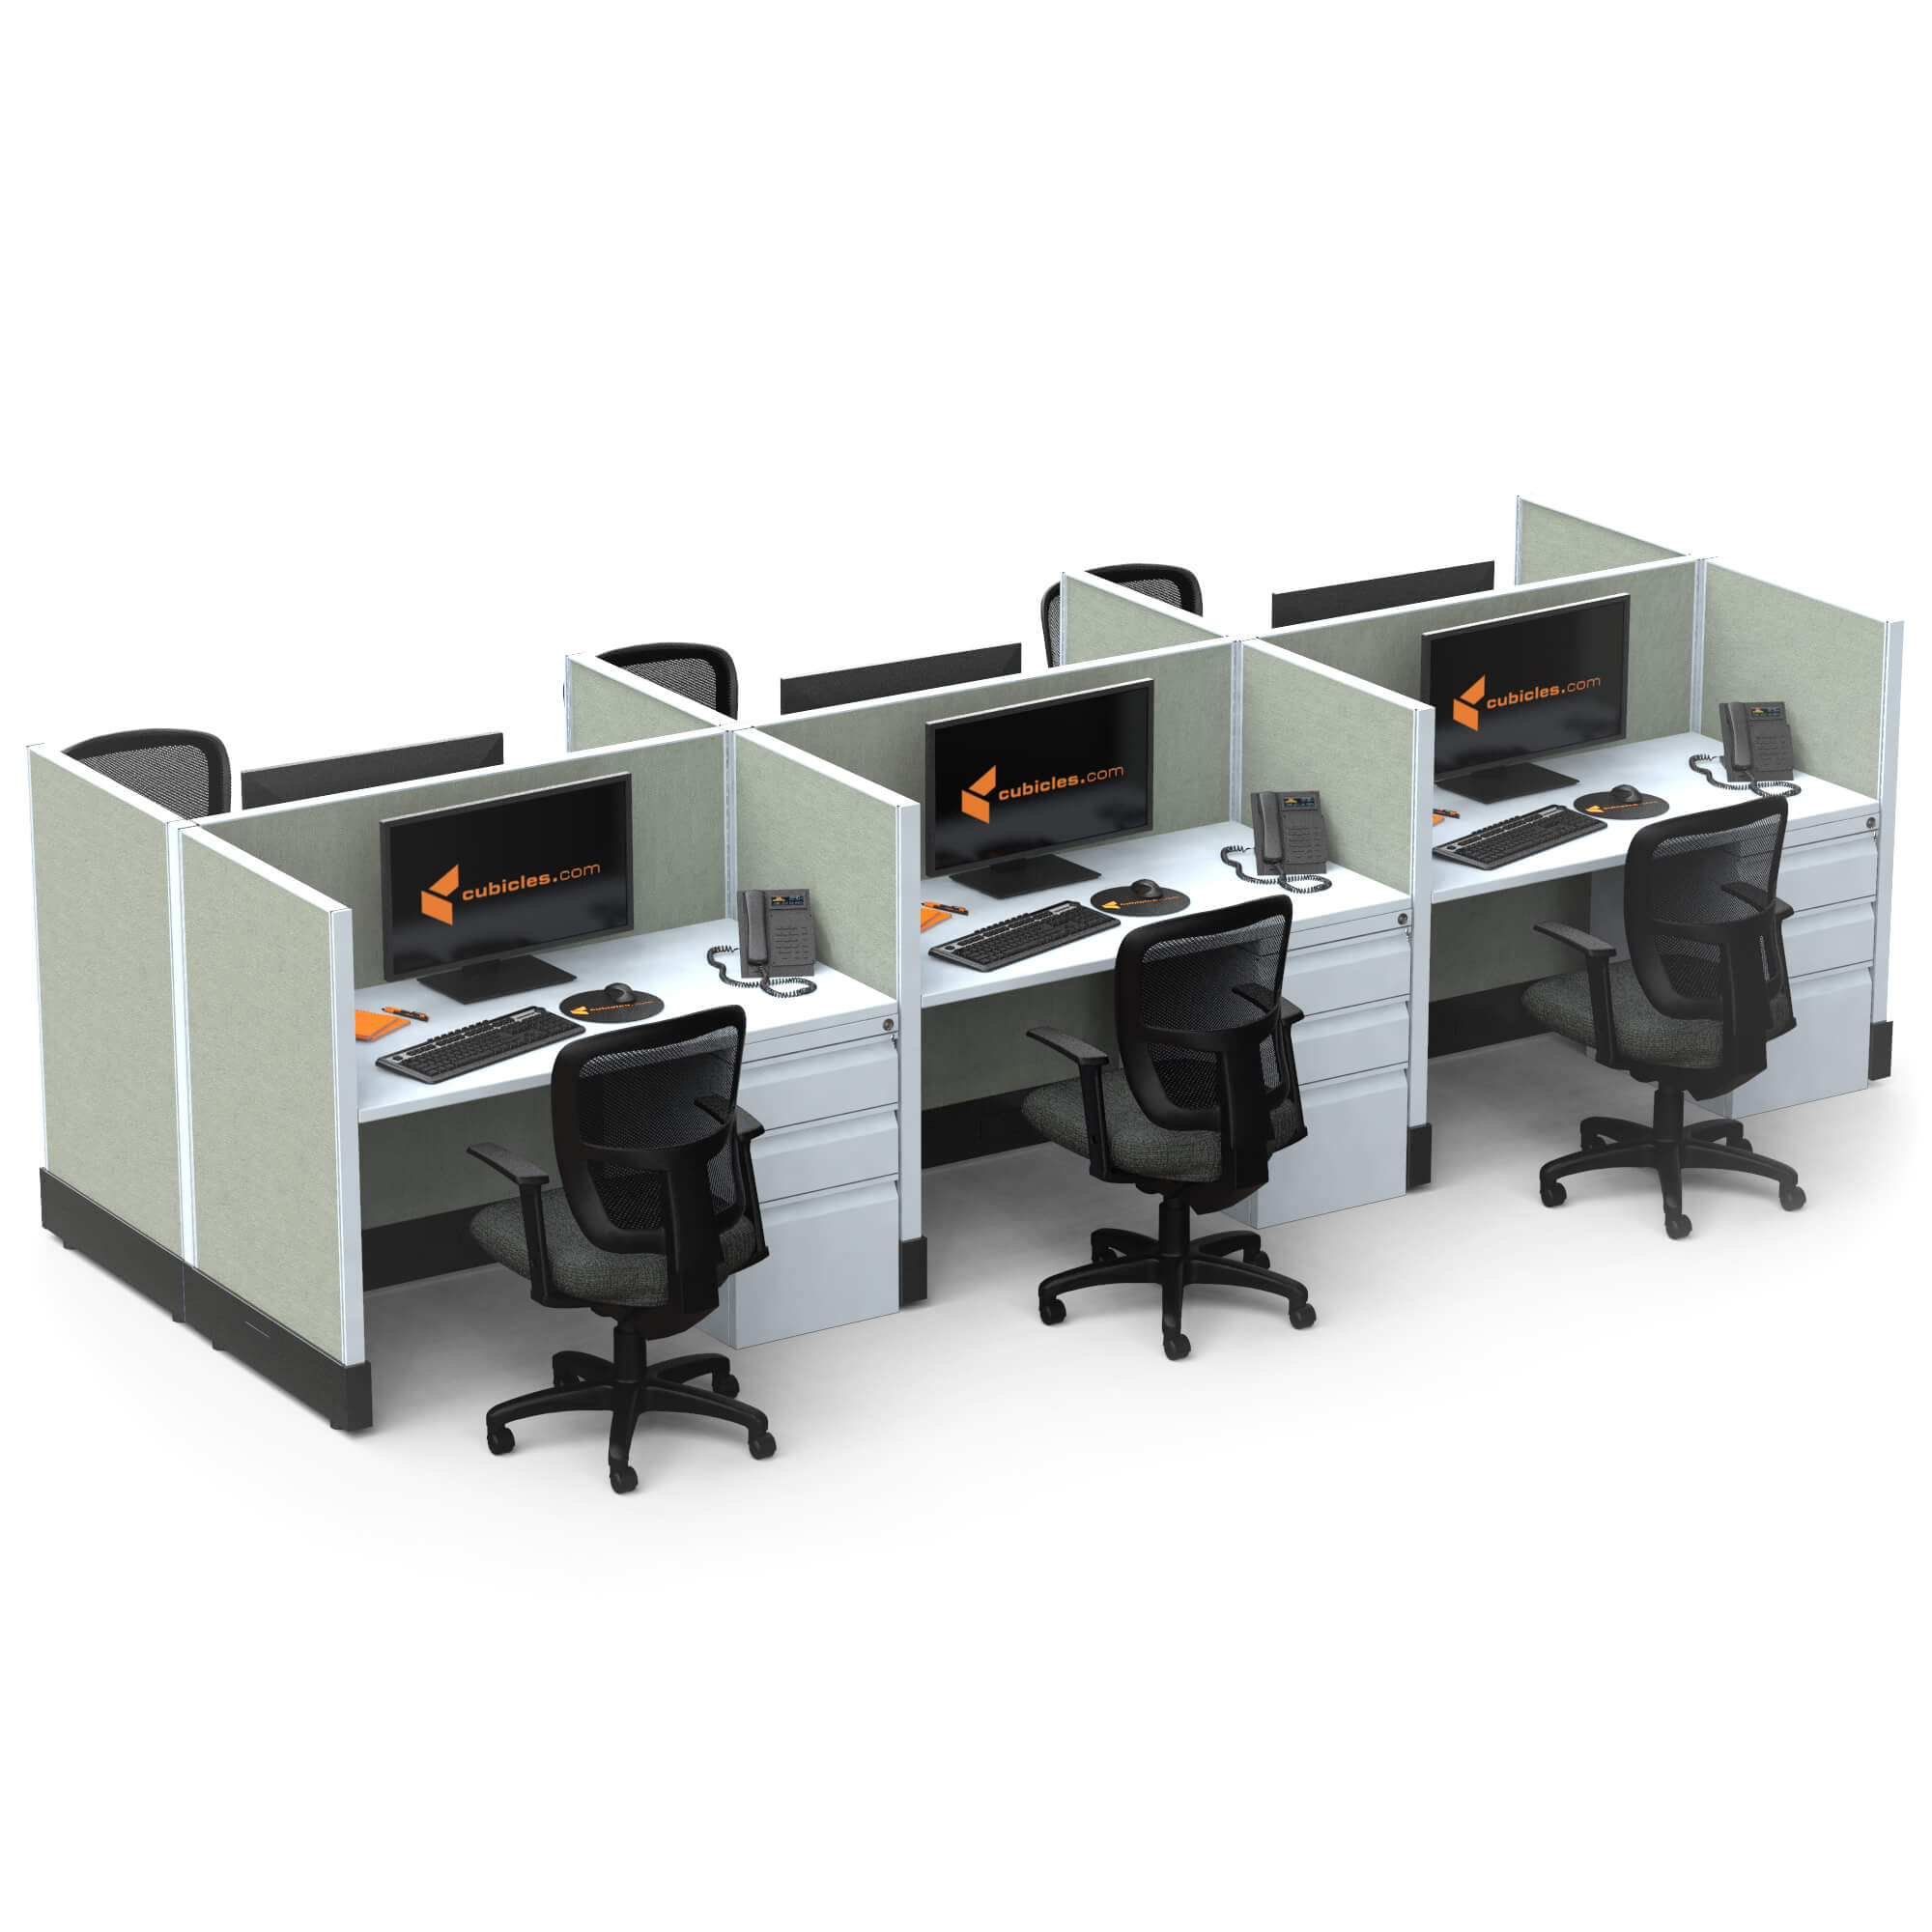 hot-desking-small-office-cubicles-6c-pack.jpg